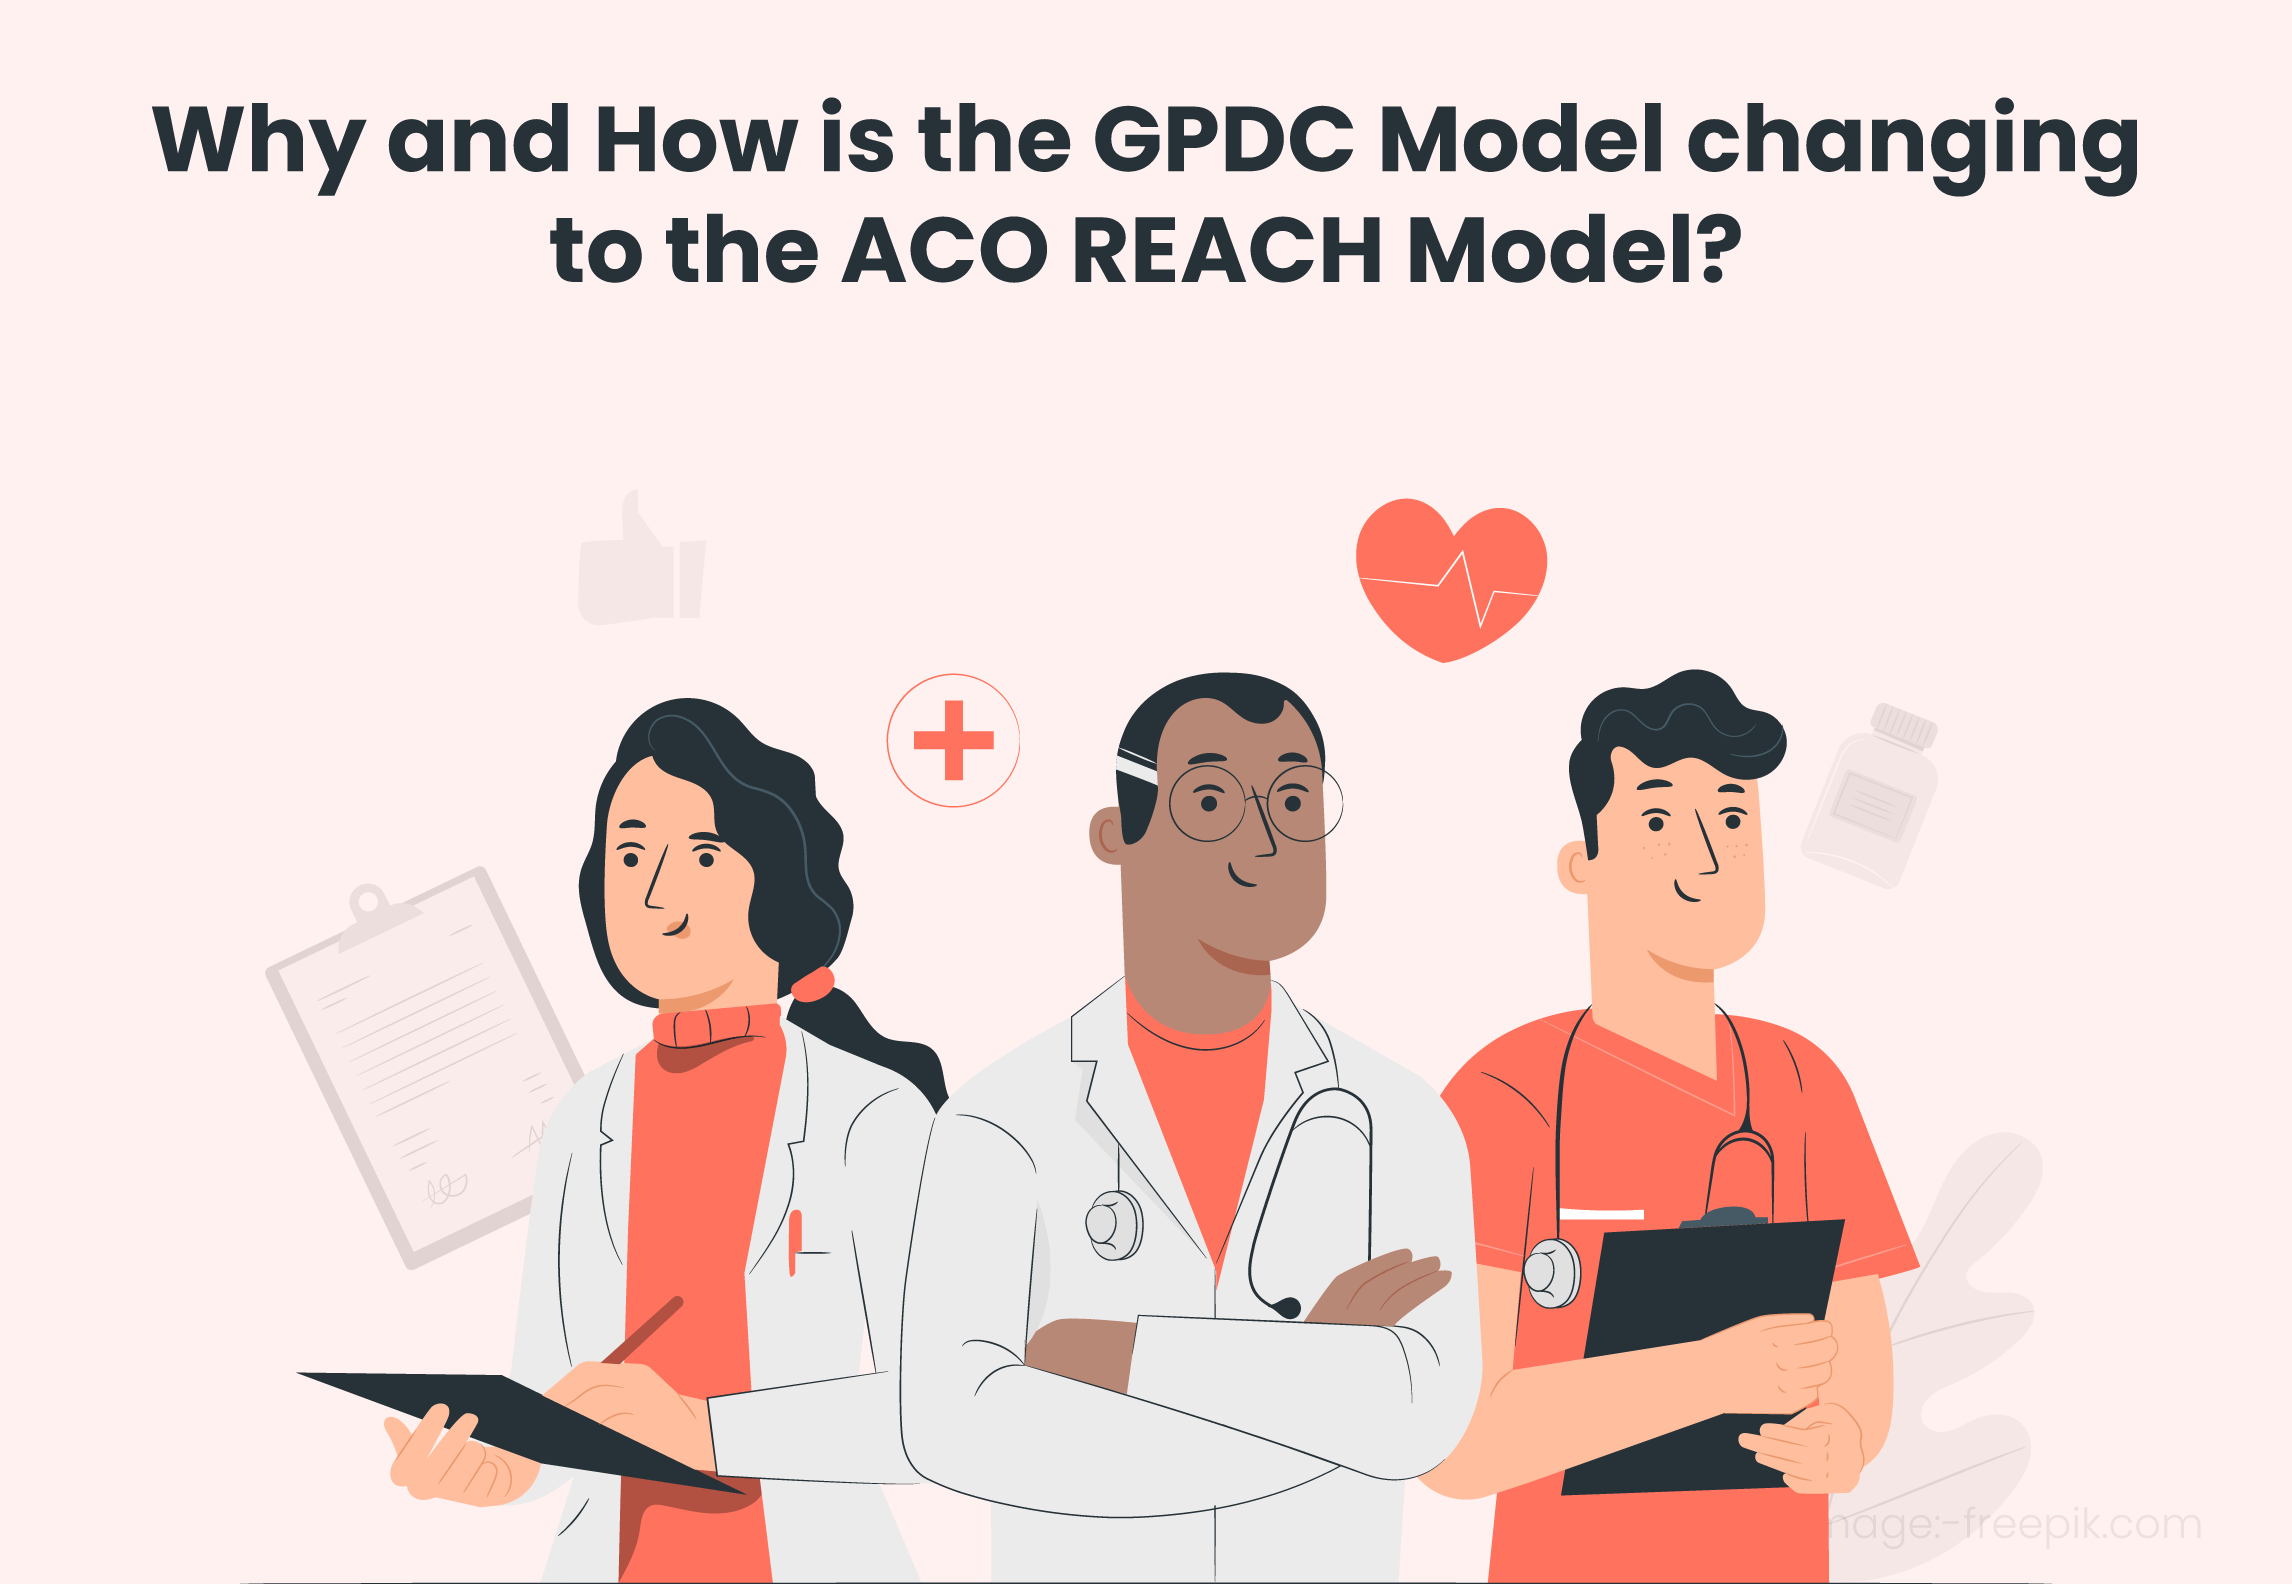 Why and How is the GPDC Model changing to the ACO REACH Model?